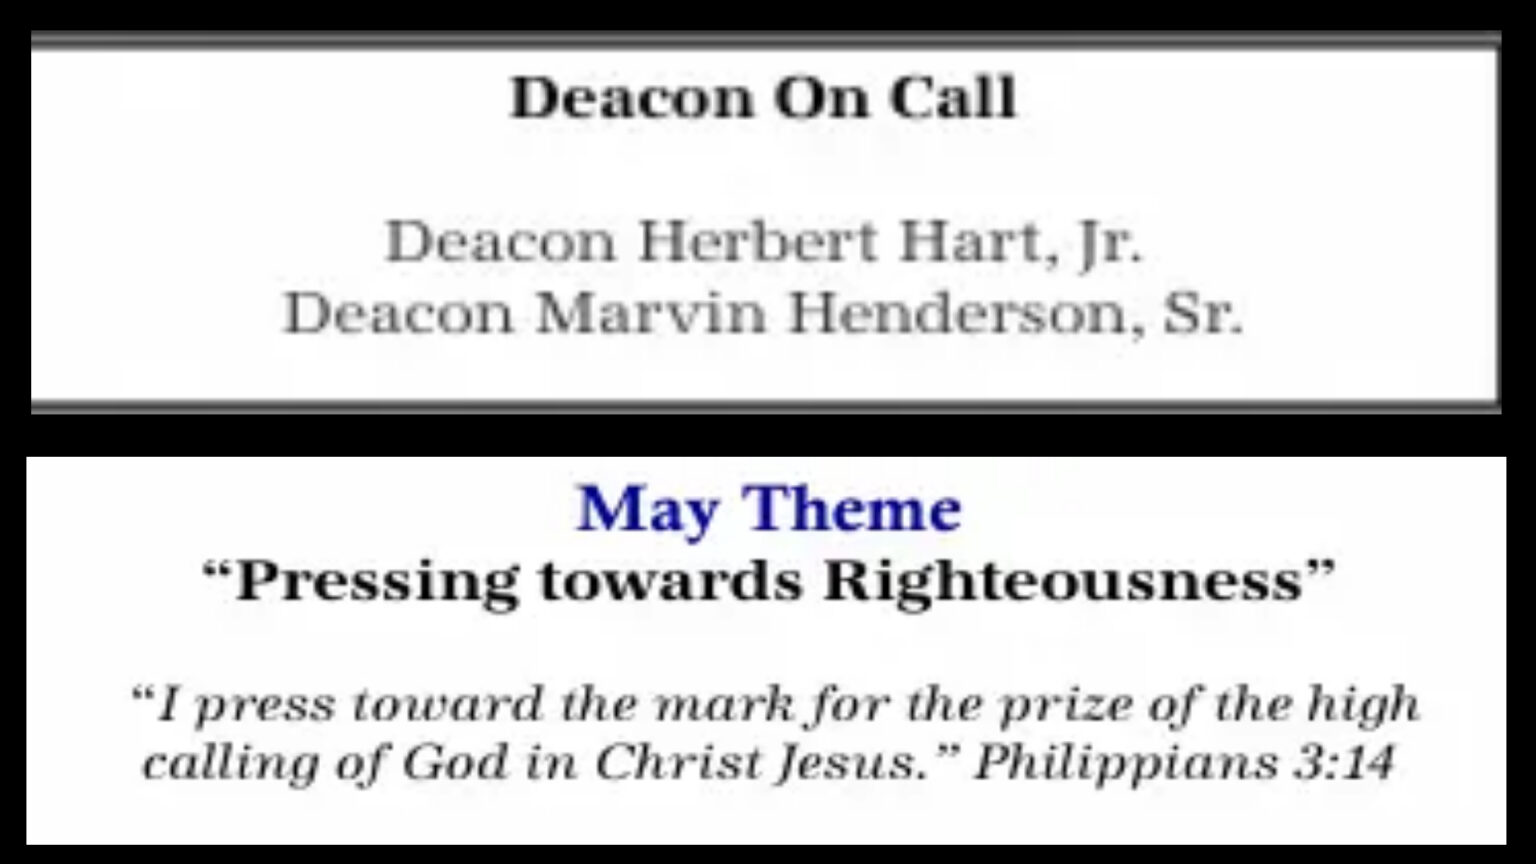 May Theme and Deacon on call - Made with PosterMyWall